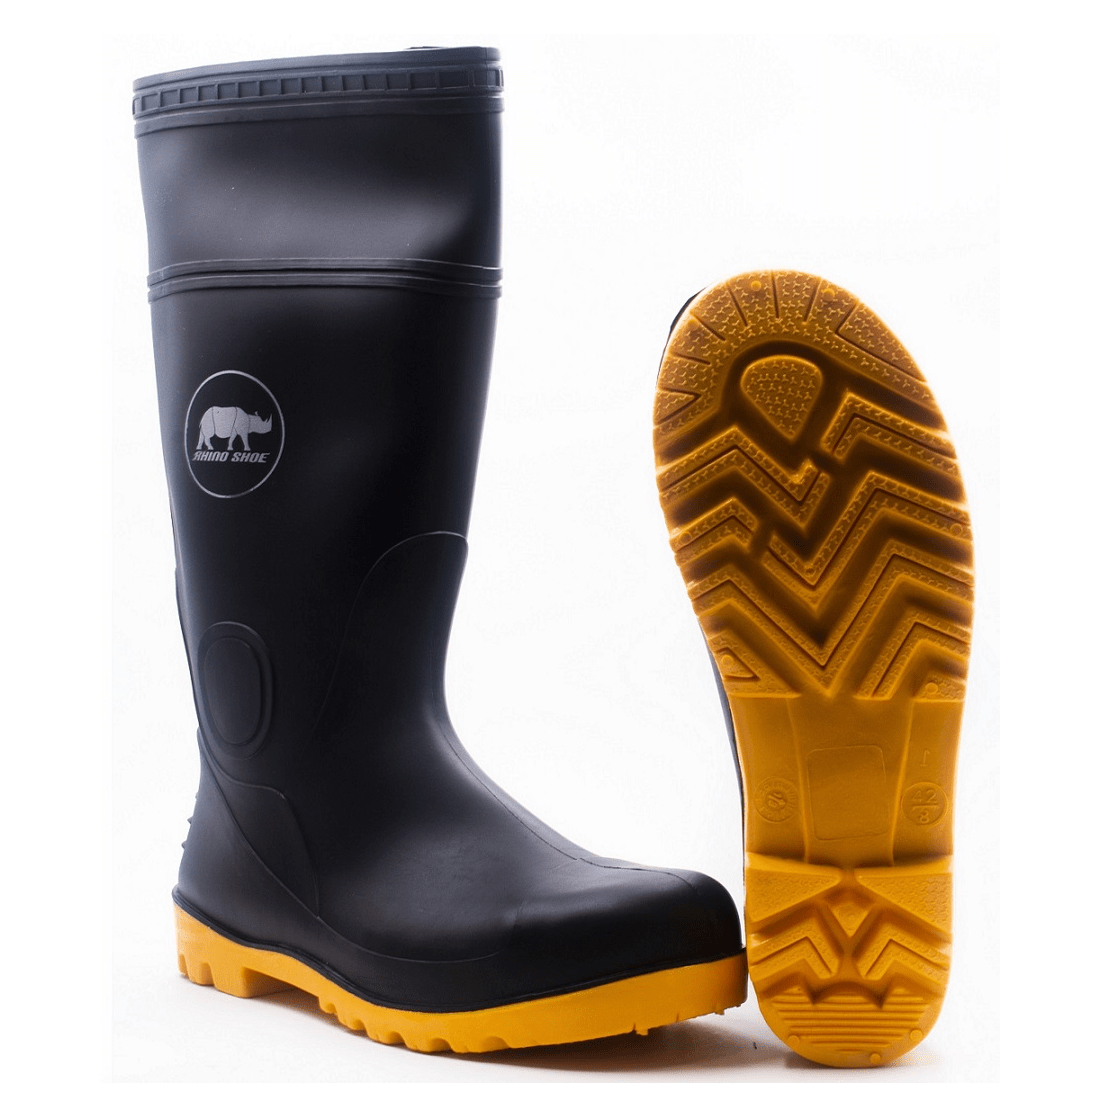 INGCO Rain Boots Safety PPE Toolmart | lupon.gov.ph